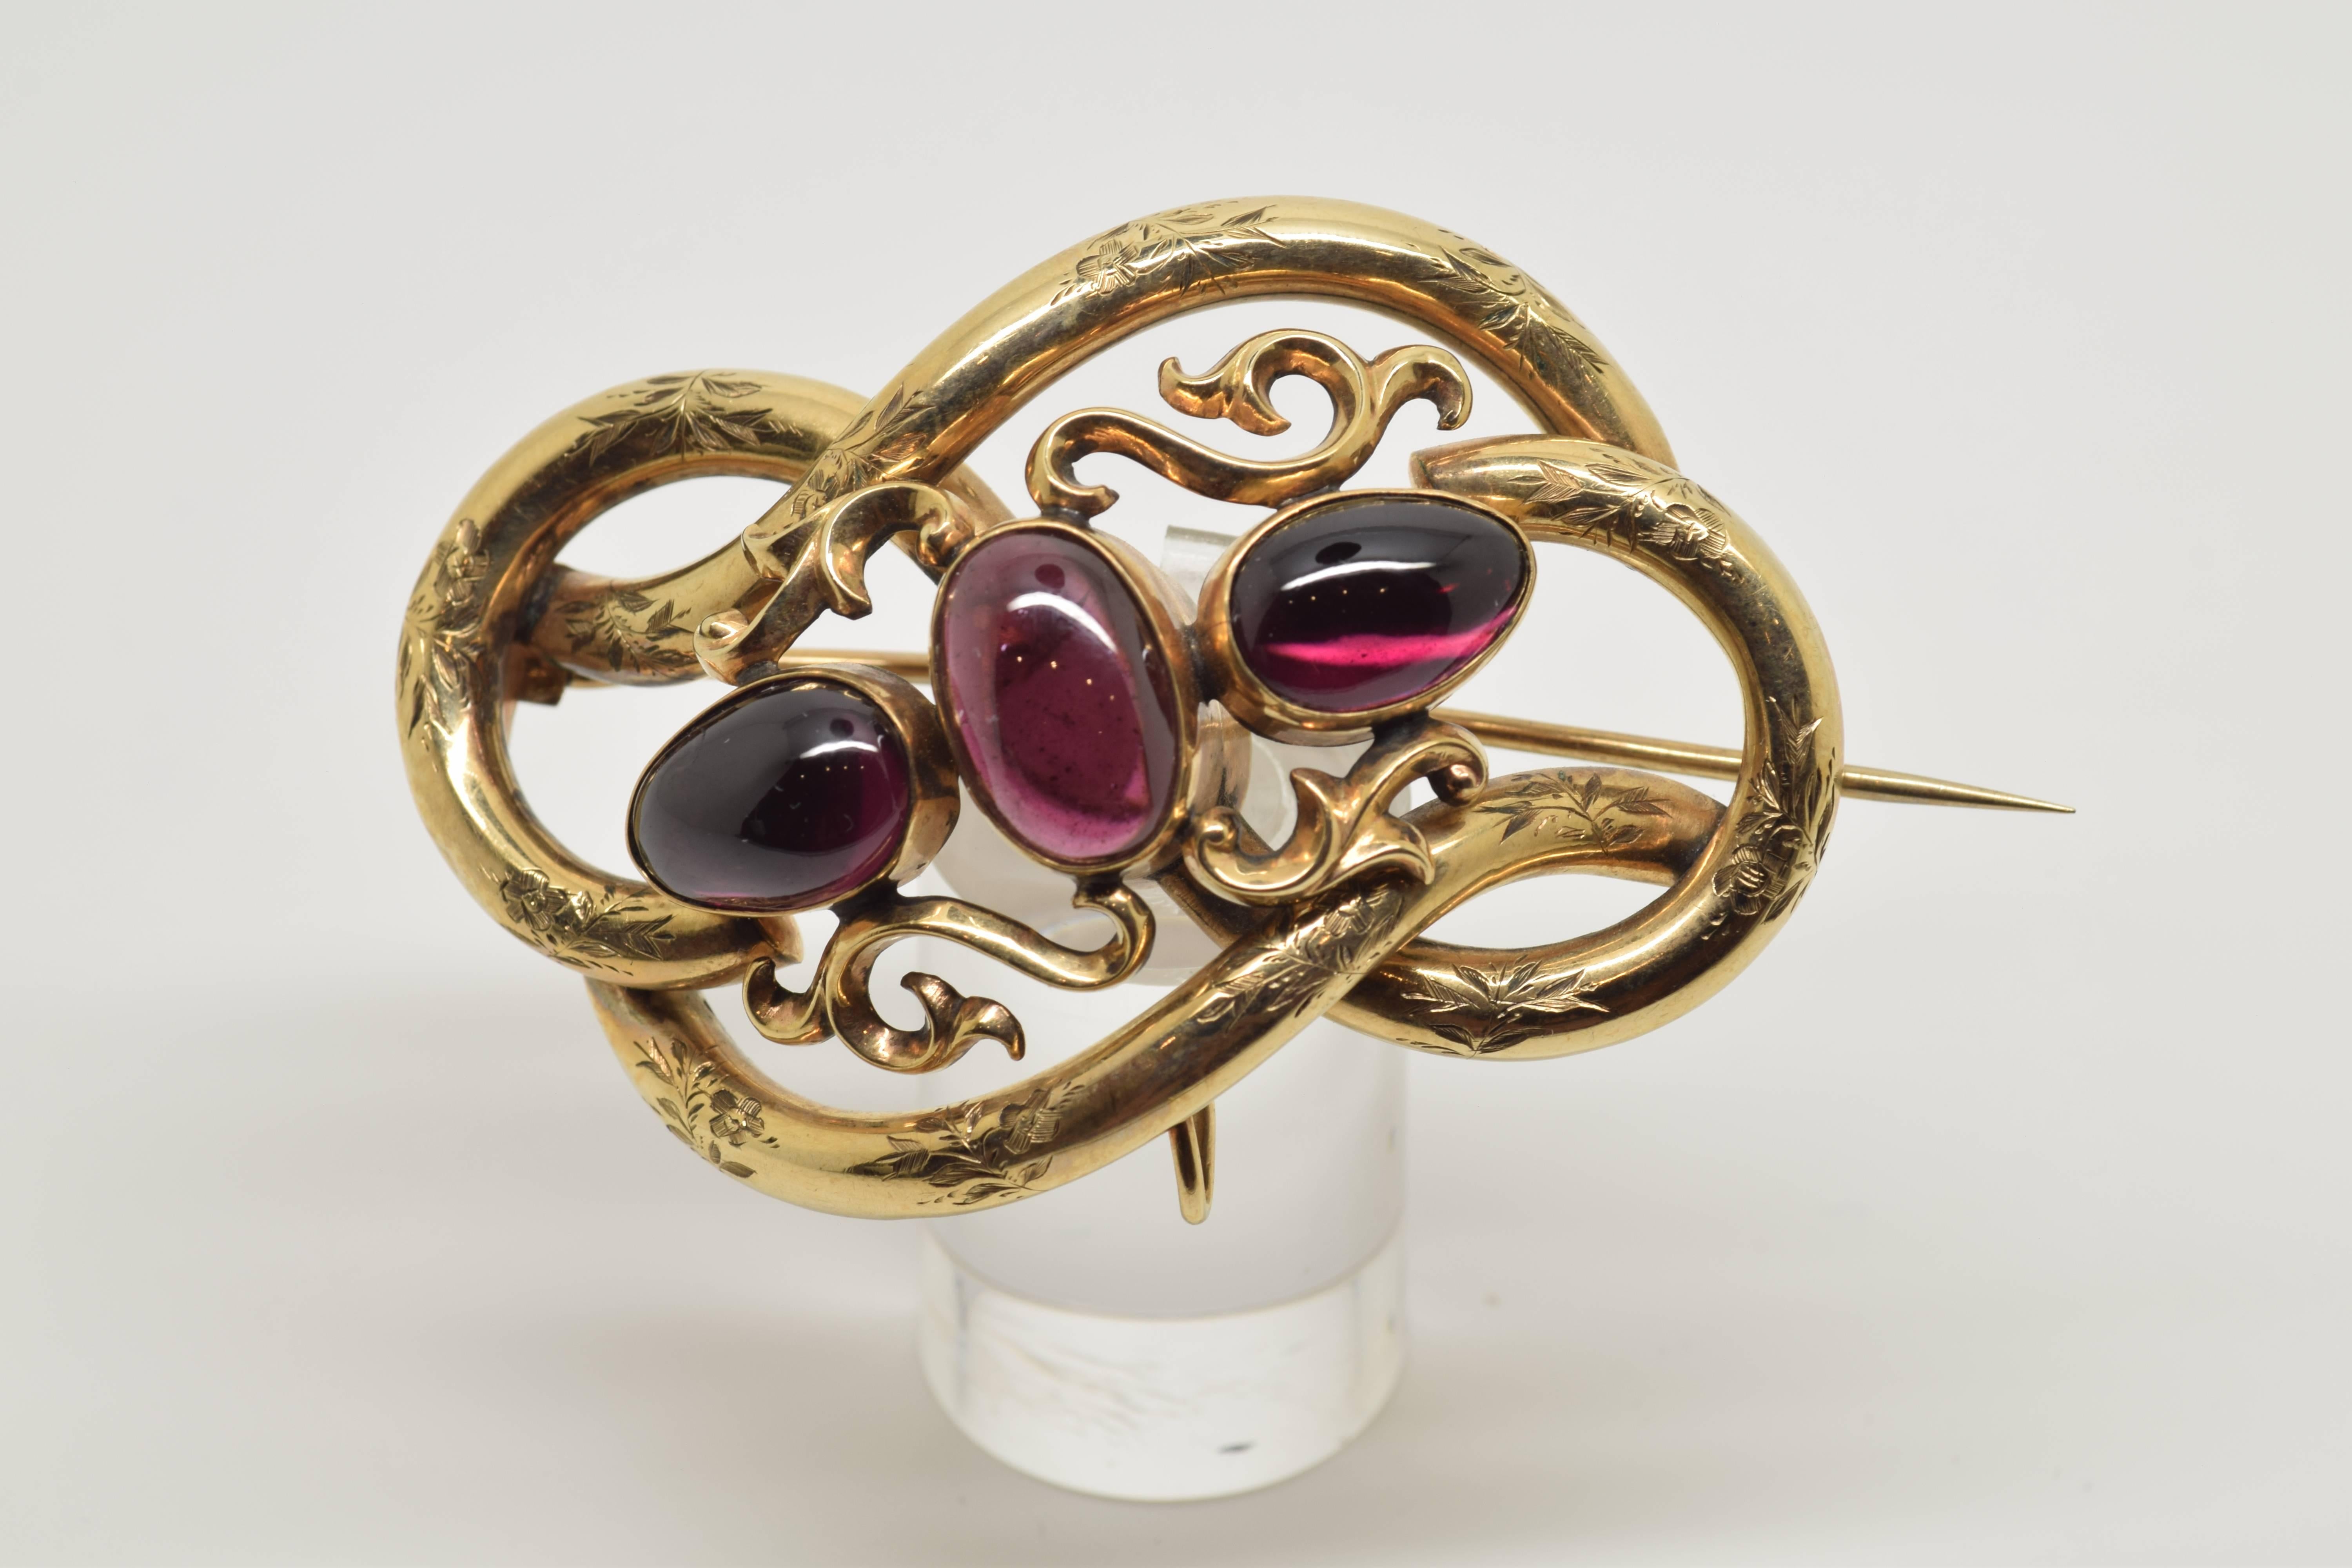 Neoclassical Revival 14-Karat Gold Brooch with Three Garnets, 20th Century For Sale